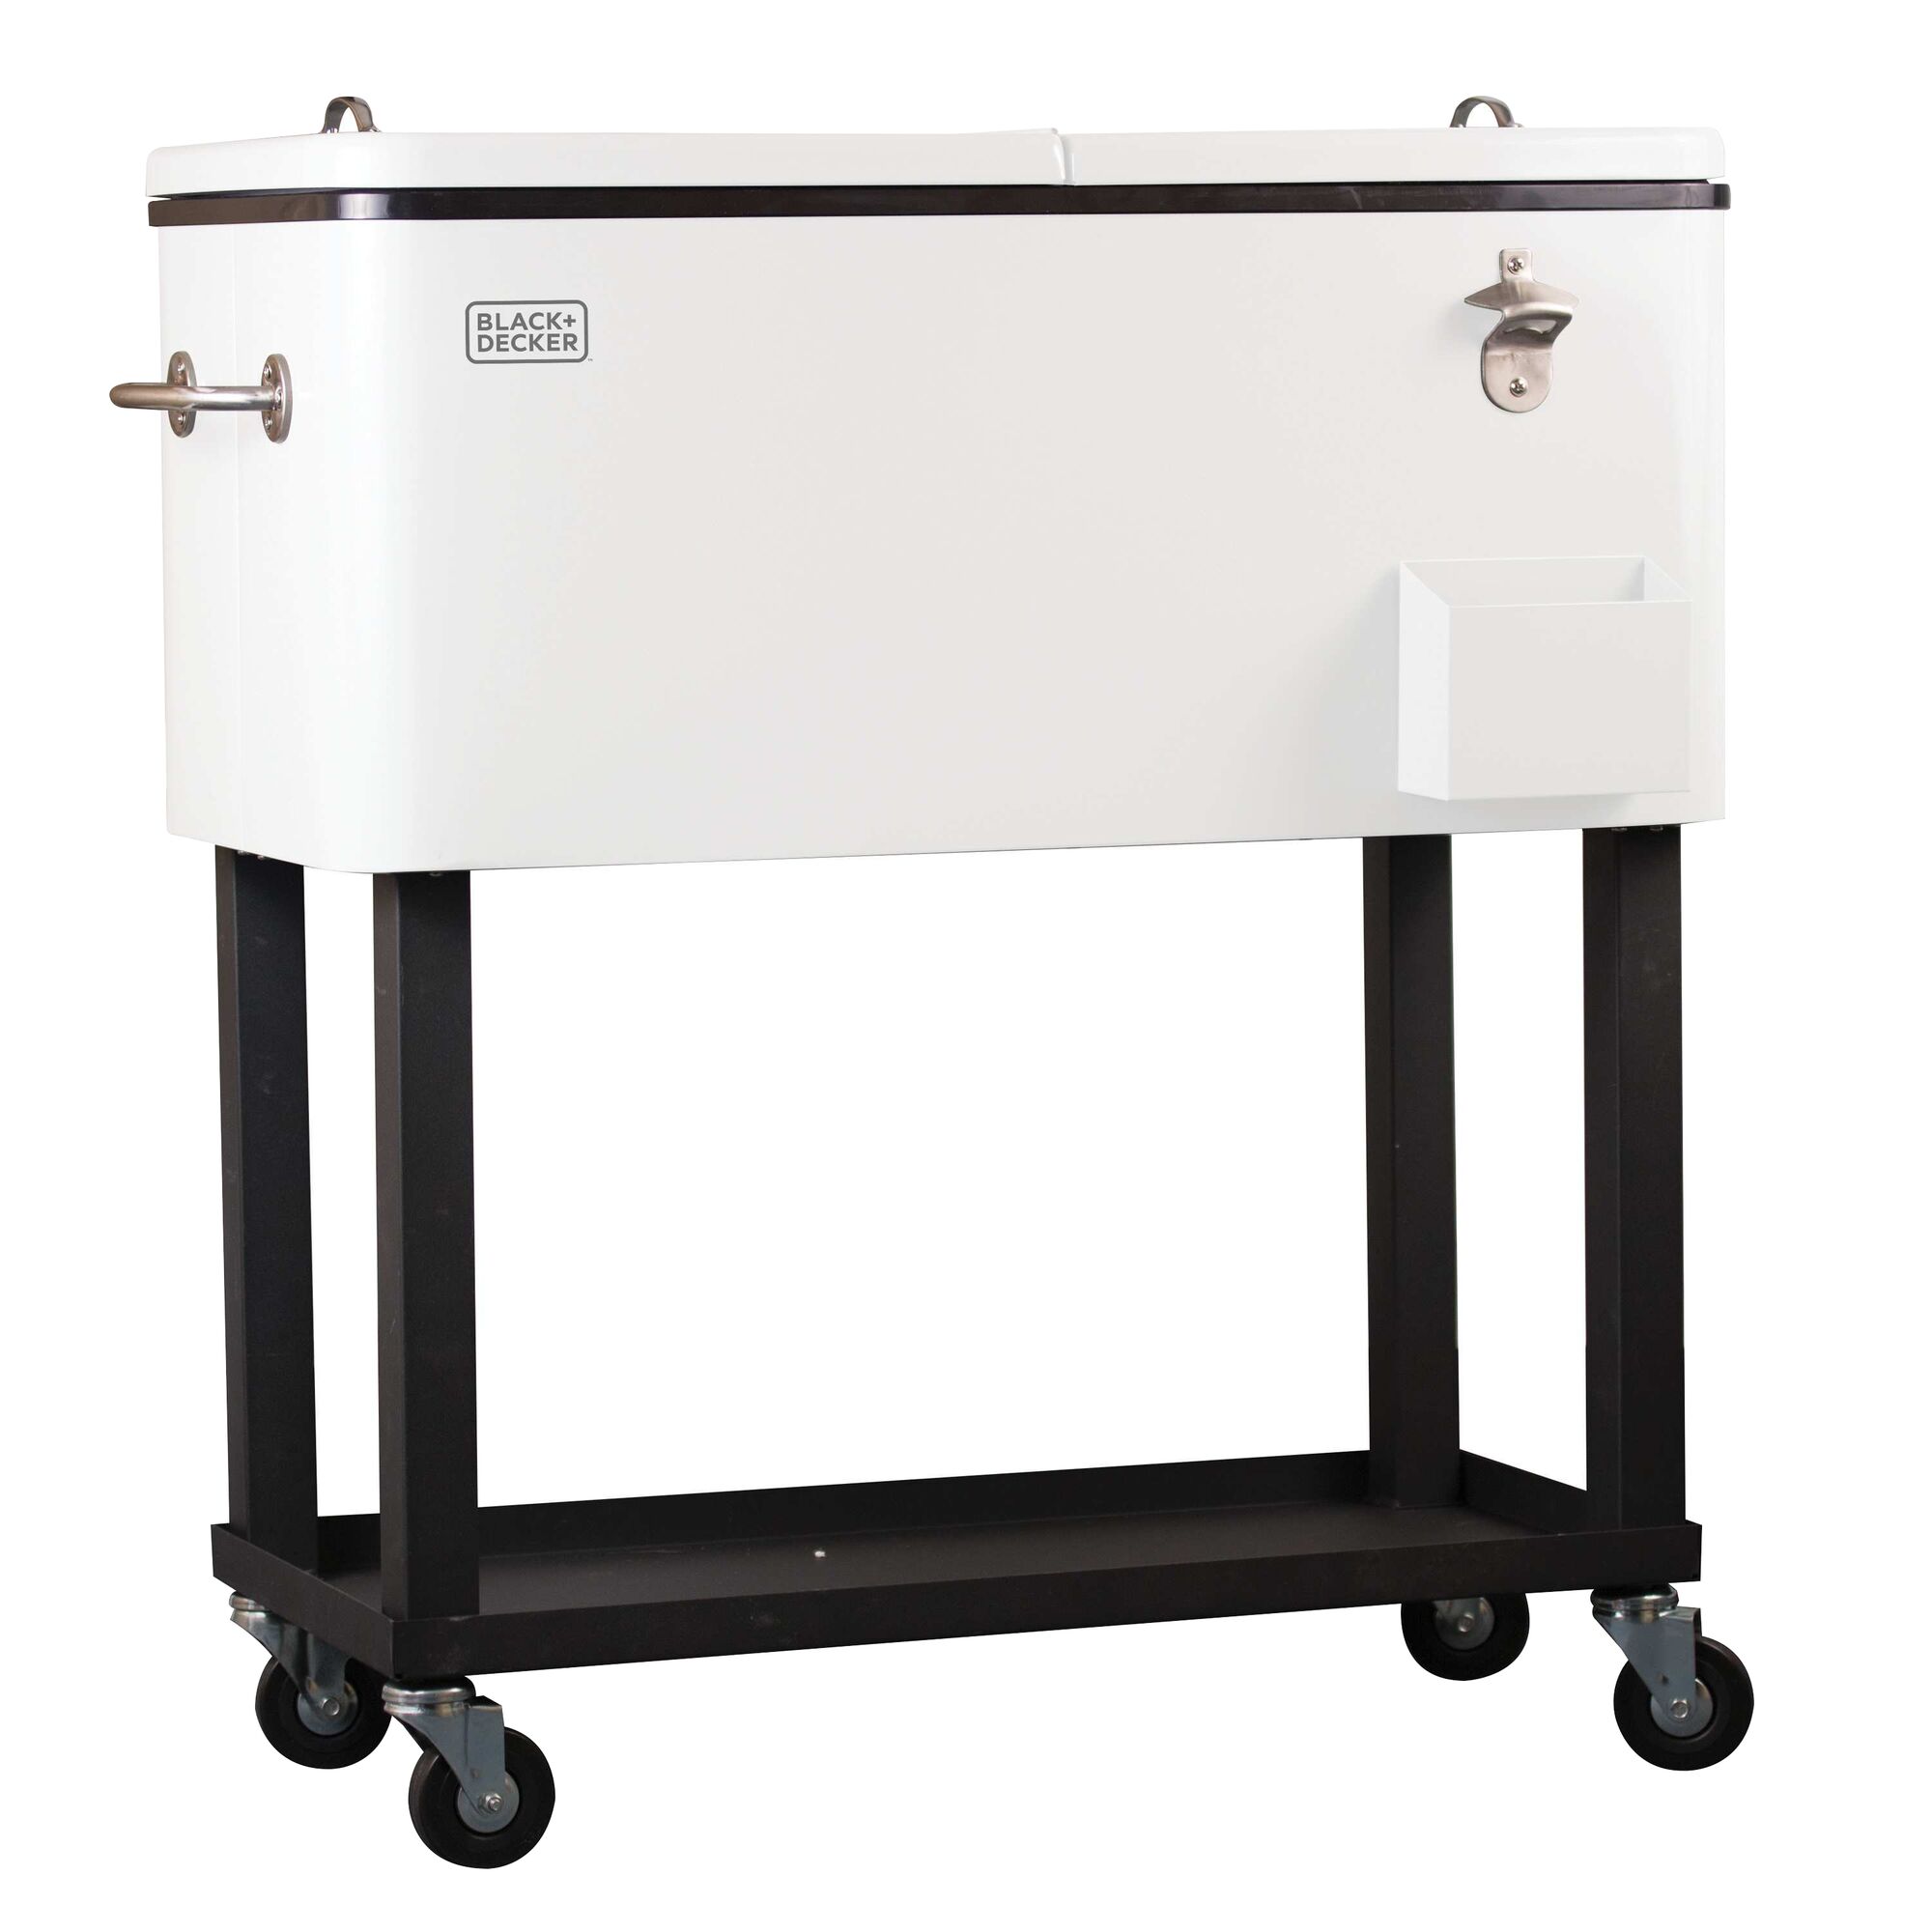 BLACK+DECKER Mobile cooler cart on wheels and at counter height